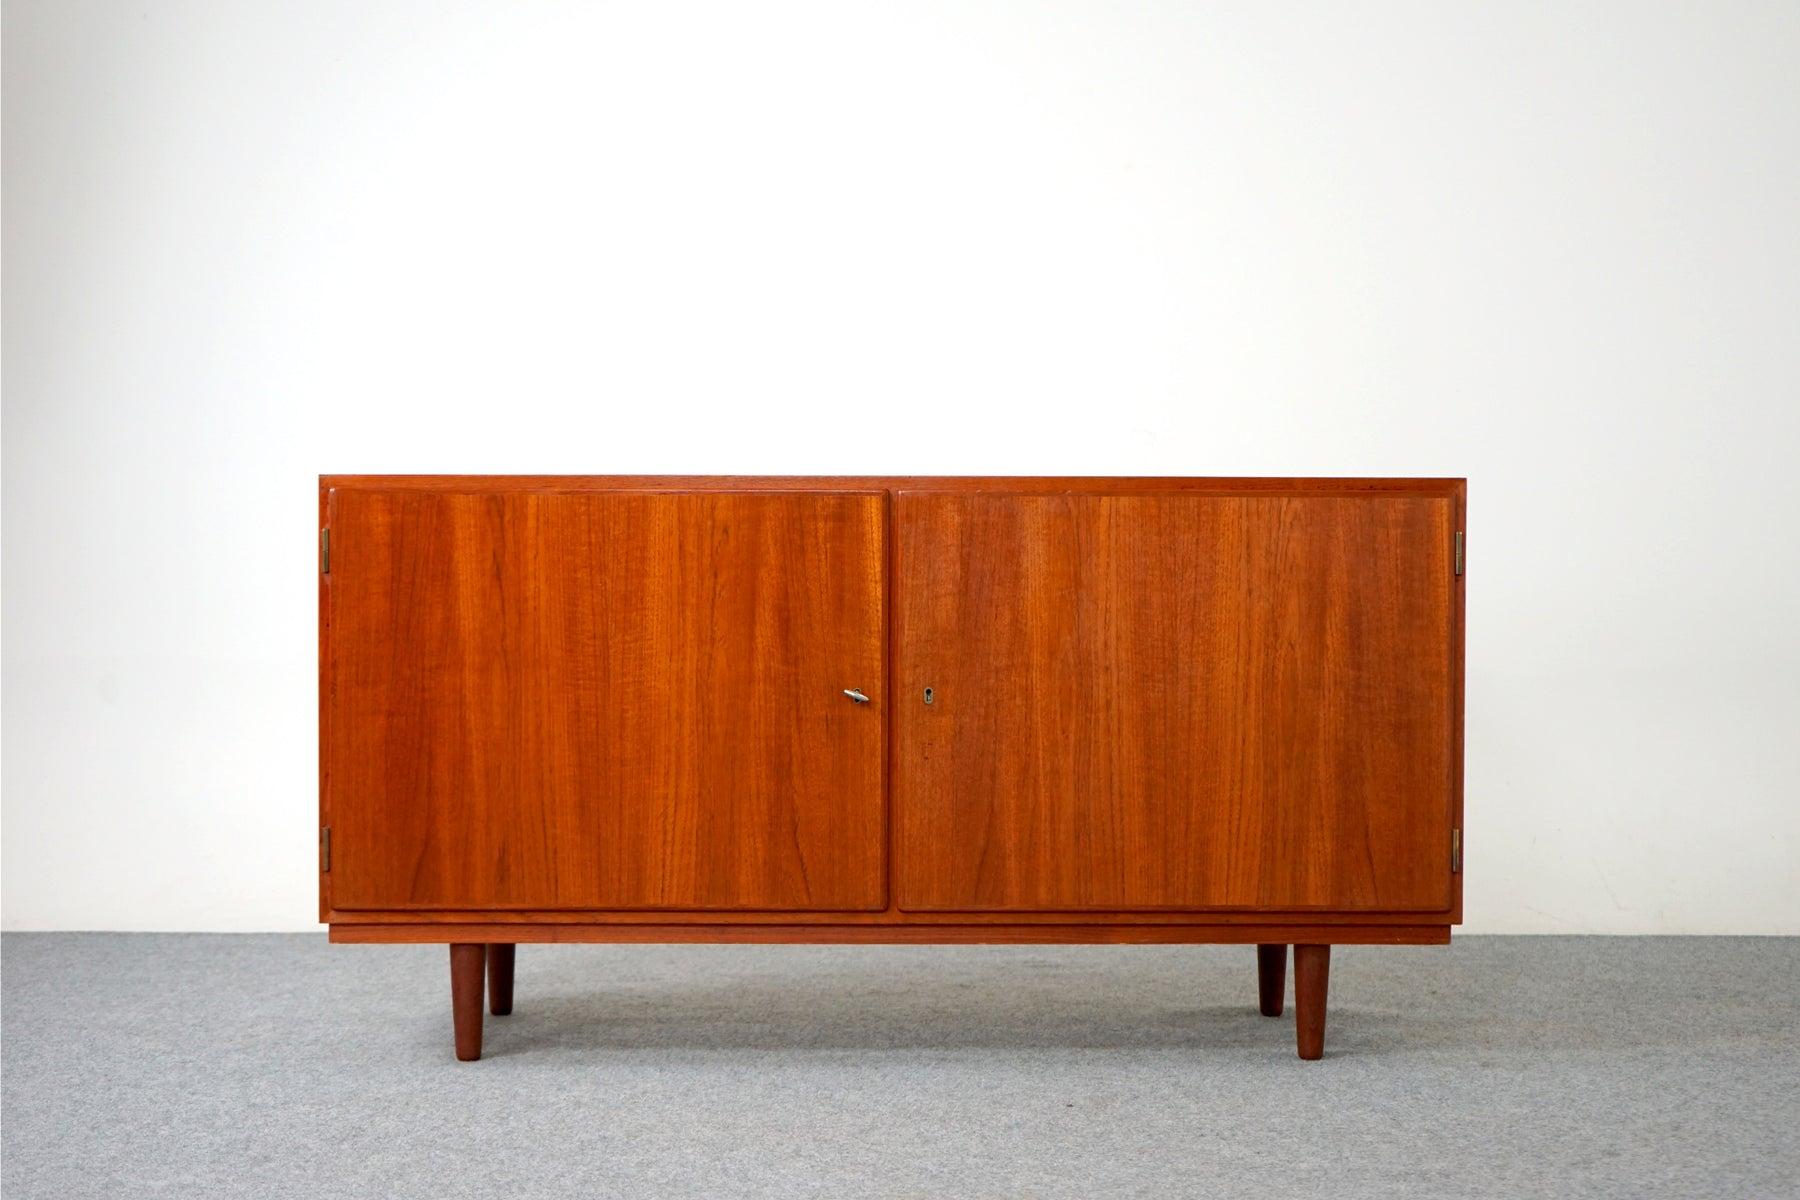 Teak Danish modern sideboard, circa 1960's. Clean, simple lined design highlights the exceptional book-matched veneer throughout. Low profile lockable cabinet offers adjustable shelving and removable legs, compact design makes it the perfect condo